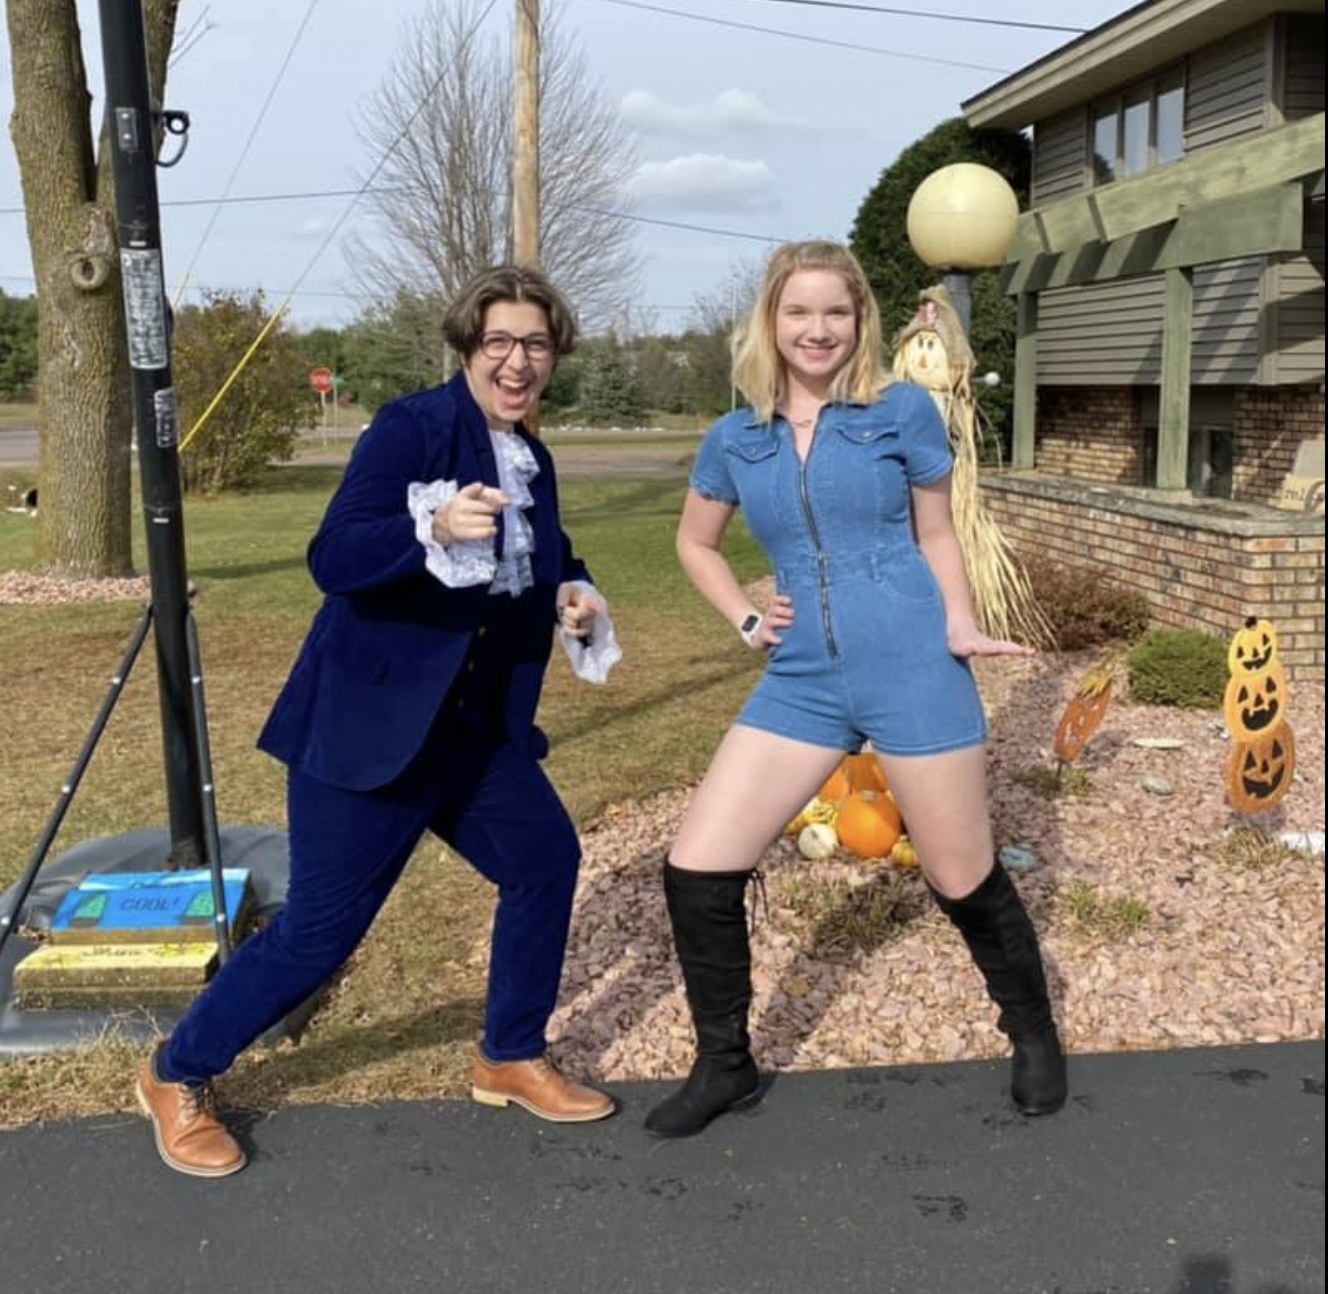 My girlfriend and I dressed as Austin Powers and Felicity Shagwell from Austin Powers 2